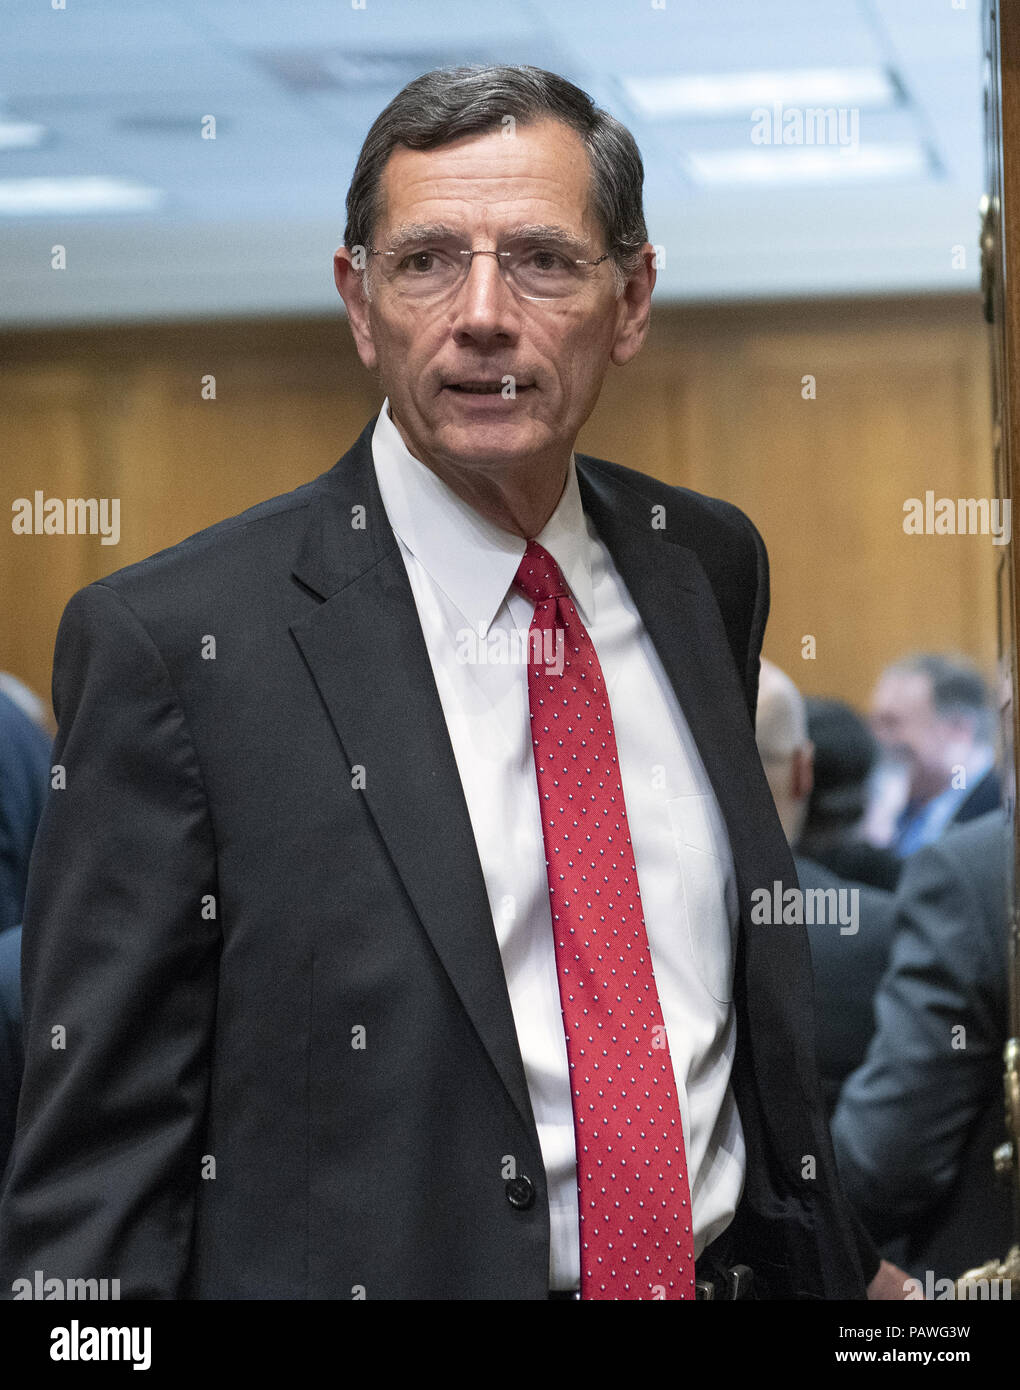 Washington, District of Columbia, USA. 25th July, 2018. United States Senator John Barrasso (Republican of Wyoming) arrives to hear US Secretary of State Mike Pompeo testify before the US Senate Committee on Foreign Relations on ''An update on American Diplomacy to Advance our National Security Strategy'' on Capitol Hill in Washington, DC on Wednesday, July 25, 2018. Pompeo took questions on the Helsinki Summit with President Putin of Russia and progress on the denuclearization of North Korea.Credit: Ron Sachs/CNP Credit: Ron Sachs/CNP/ZUMA Wire/Alamy Live News Stock Photo